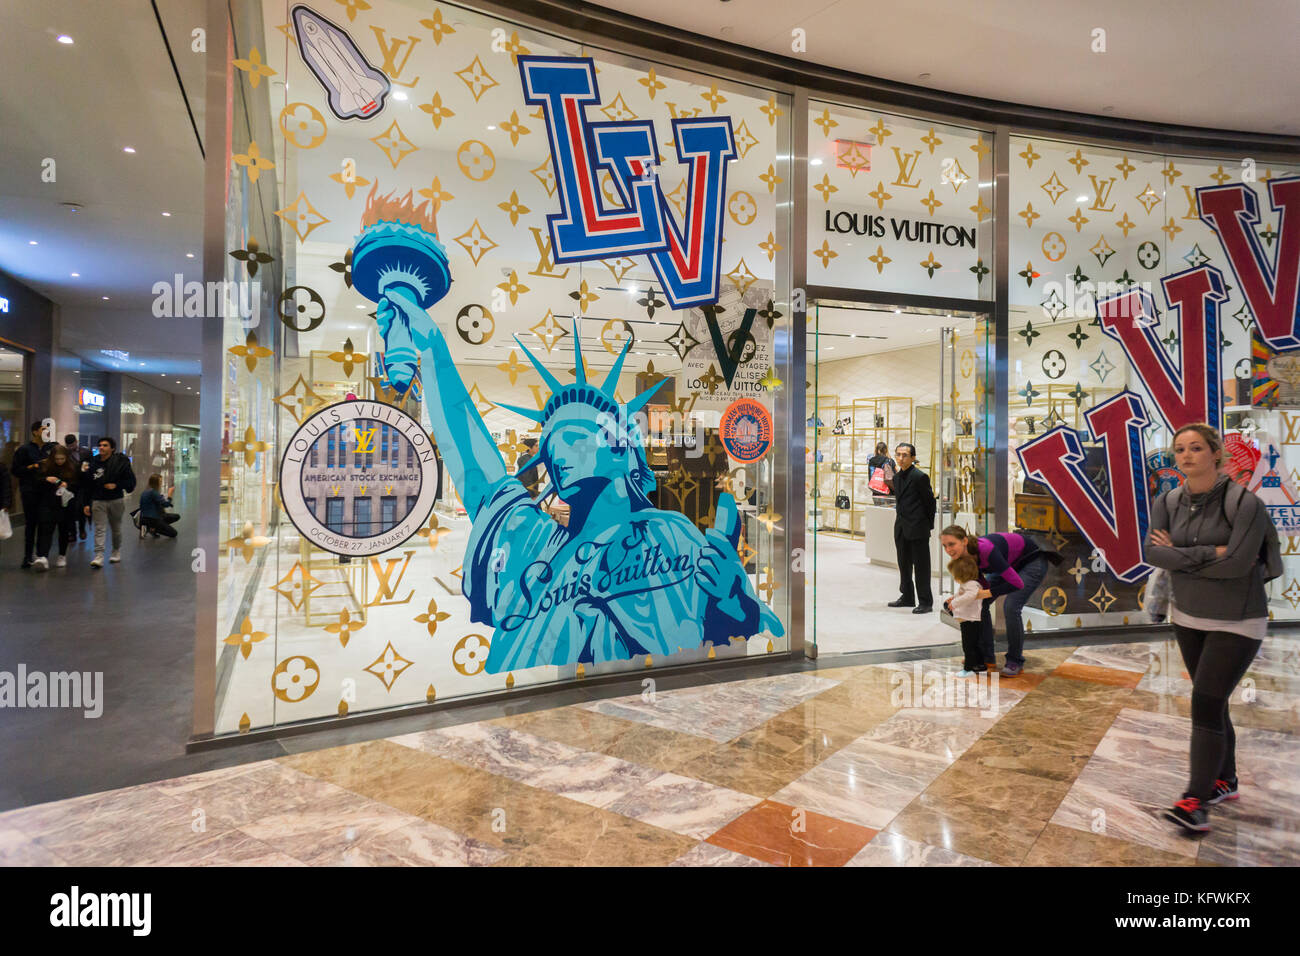 Free Louis Vuitton Pop-Up in NYC 🎈🍾 #nyc #nycrecs #nycthingstodo